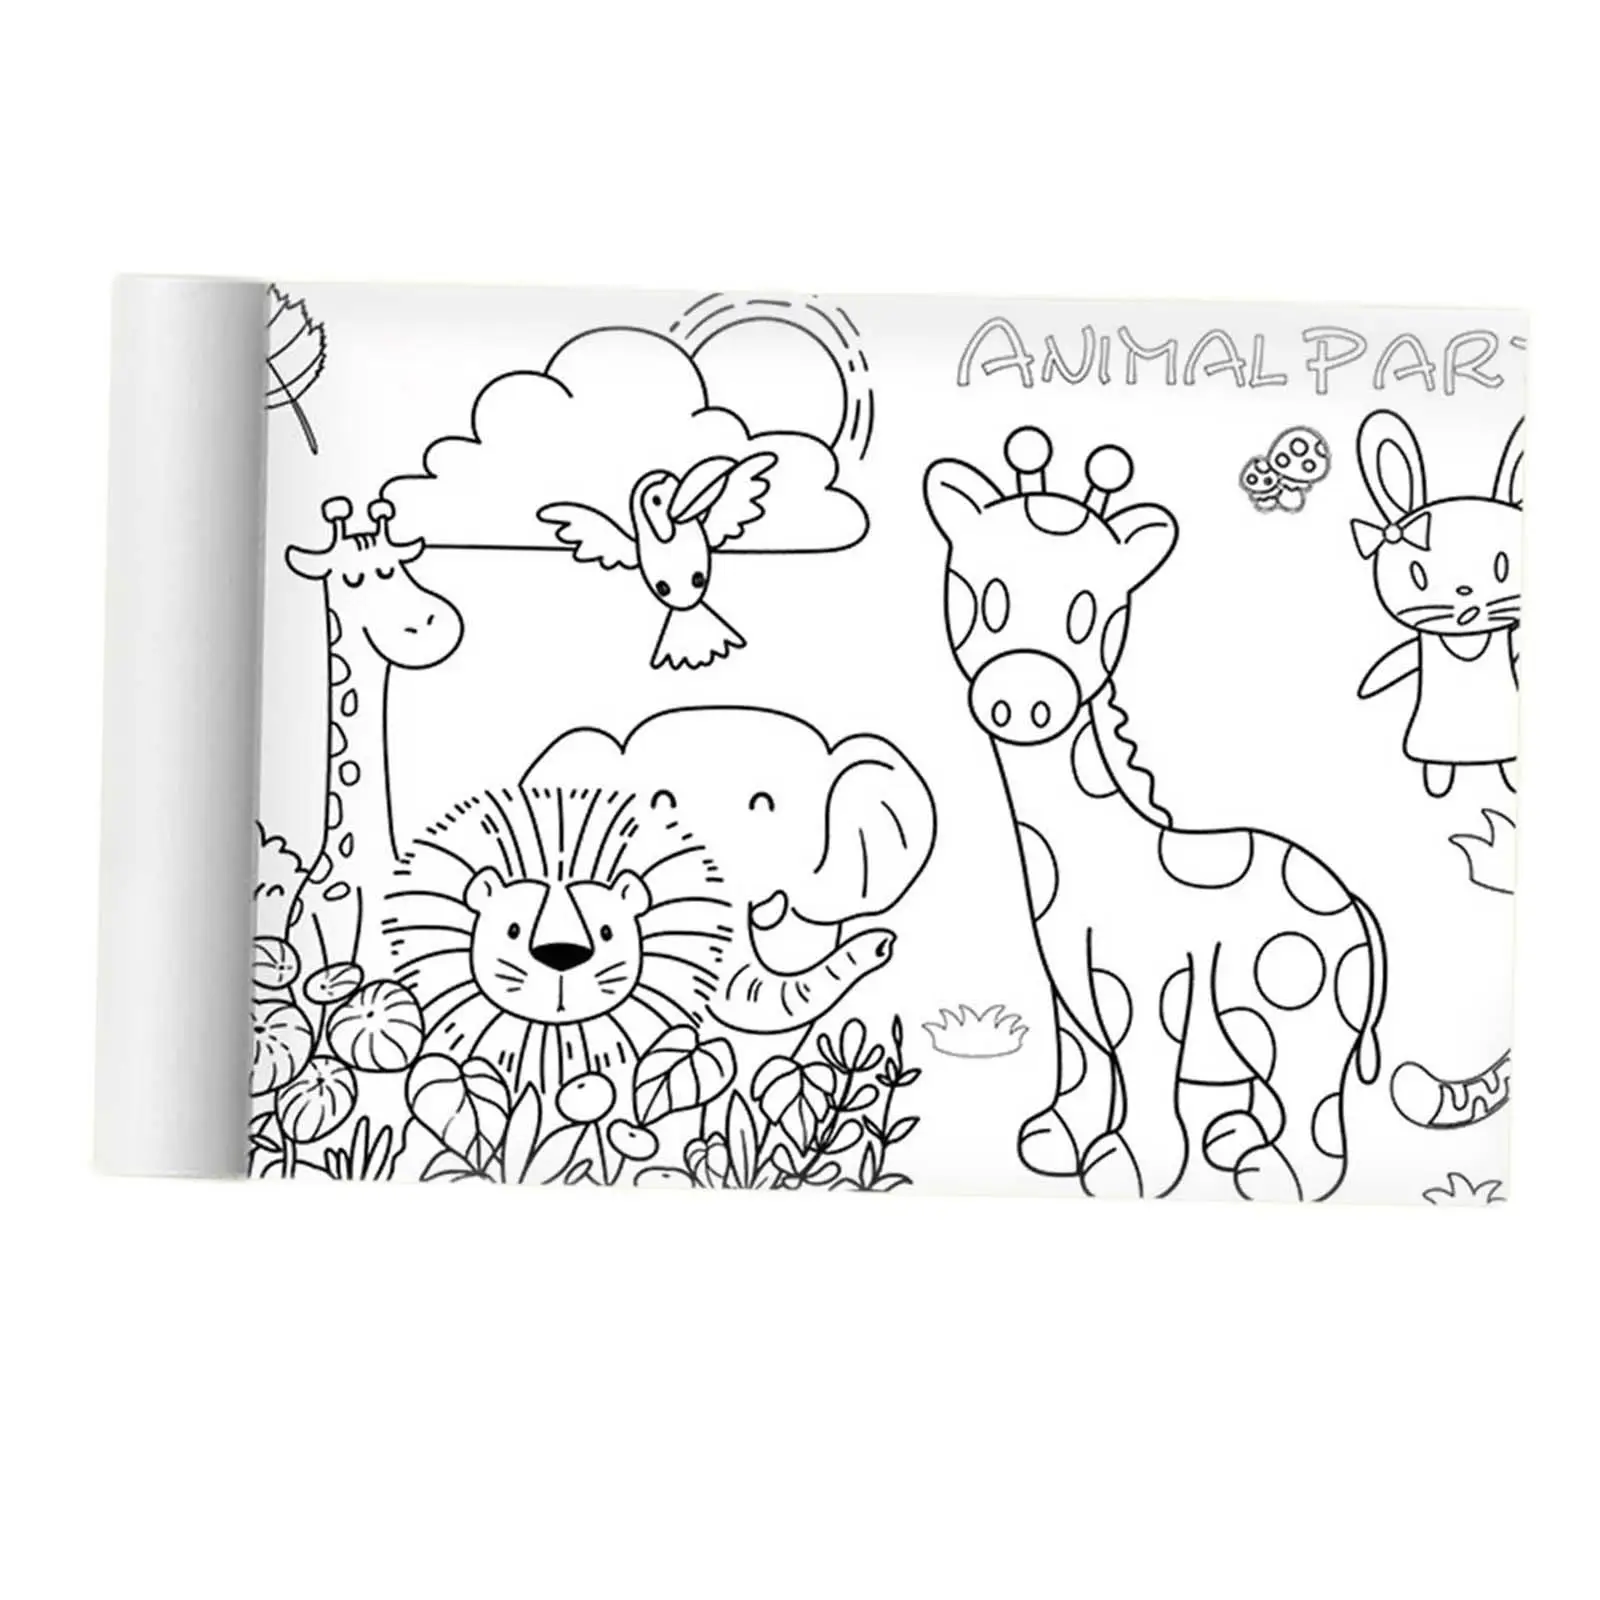 Coloring Paper Roll, Coloring Books, Wall Coloring Paper, Art Paper Crafts, Coloring Tablecloth for Kids Craft Supplies